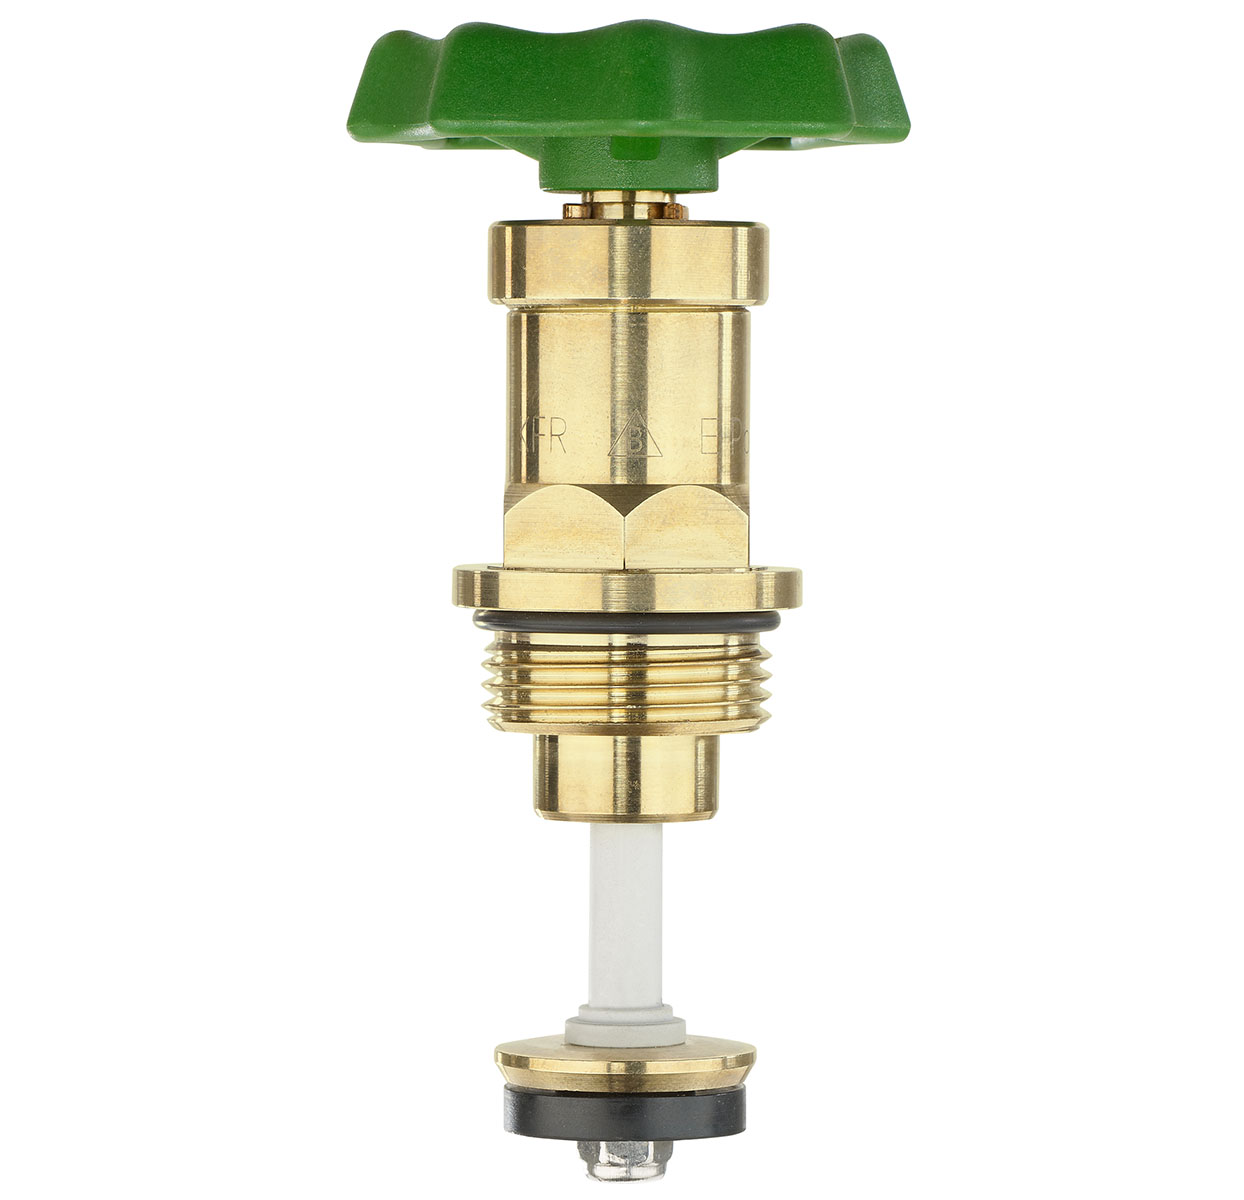 1275500 - Cuphin Upper-part with grease chamber SOFT-drive-system, for Combined Free-flow and Backflow-preventer valves, not-rising spindle